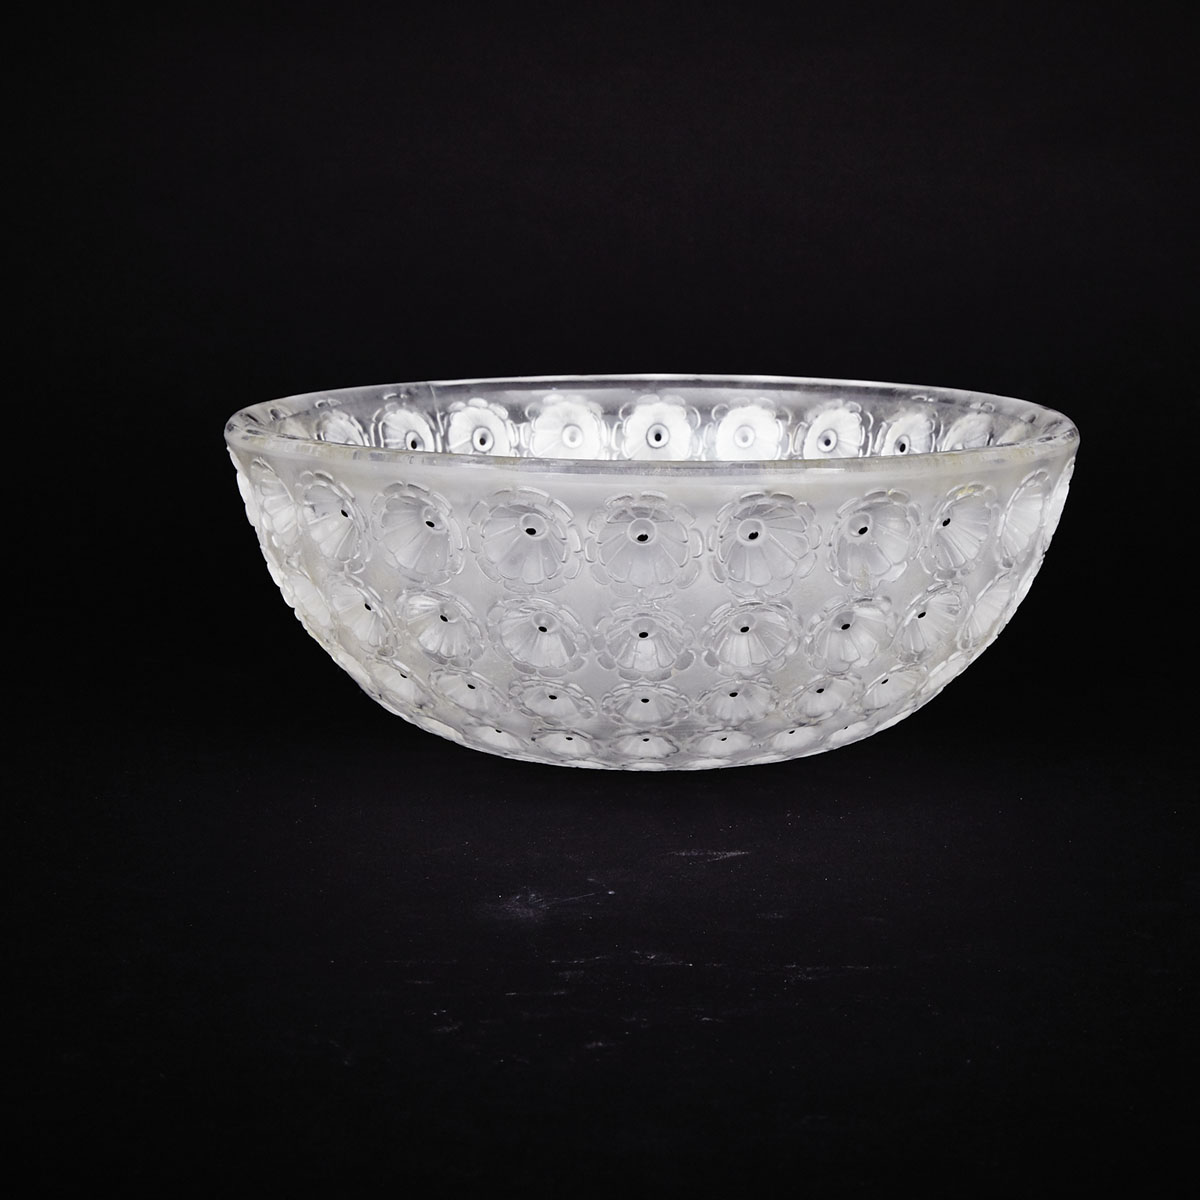 ‘Nemours’, Lalique Frosted and Enameled Glass Bowl, post-1978